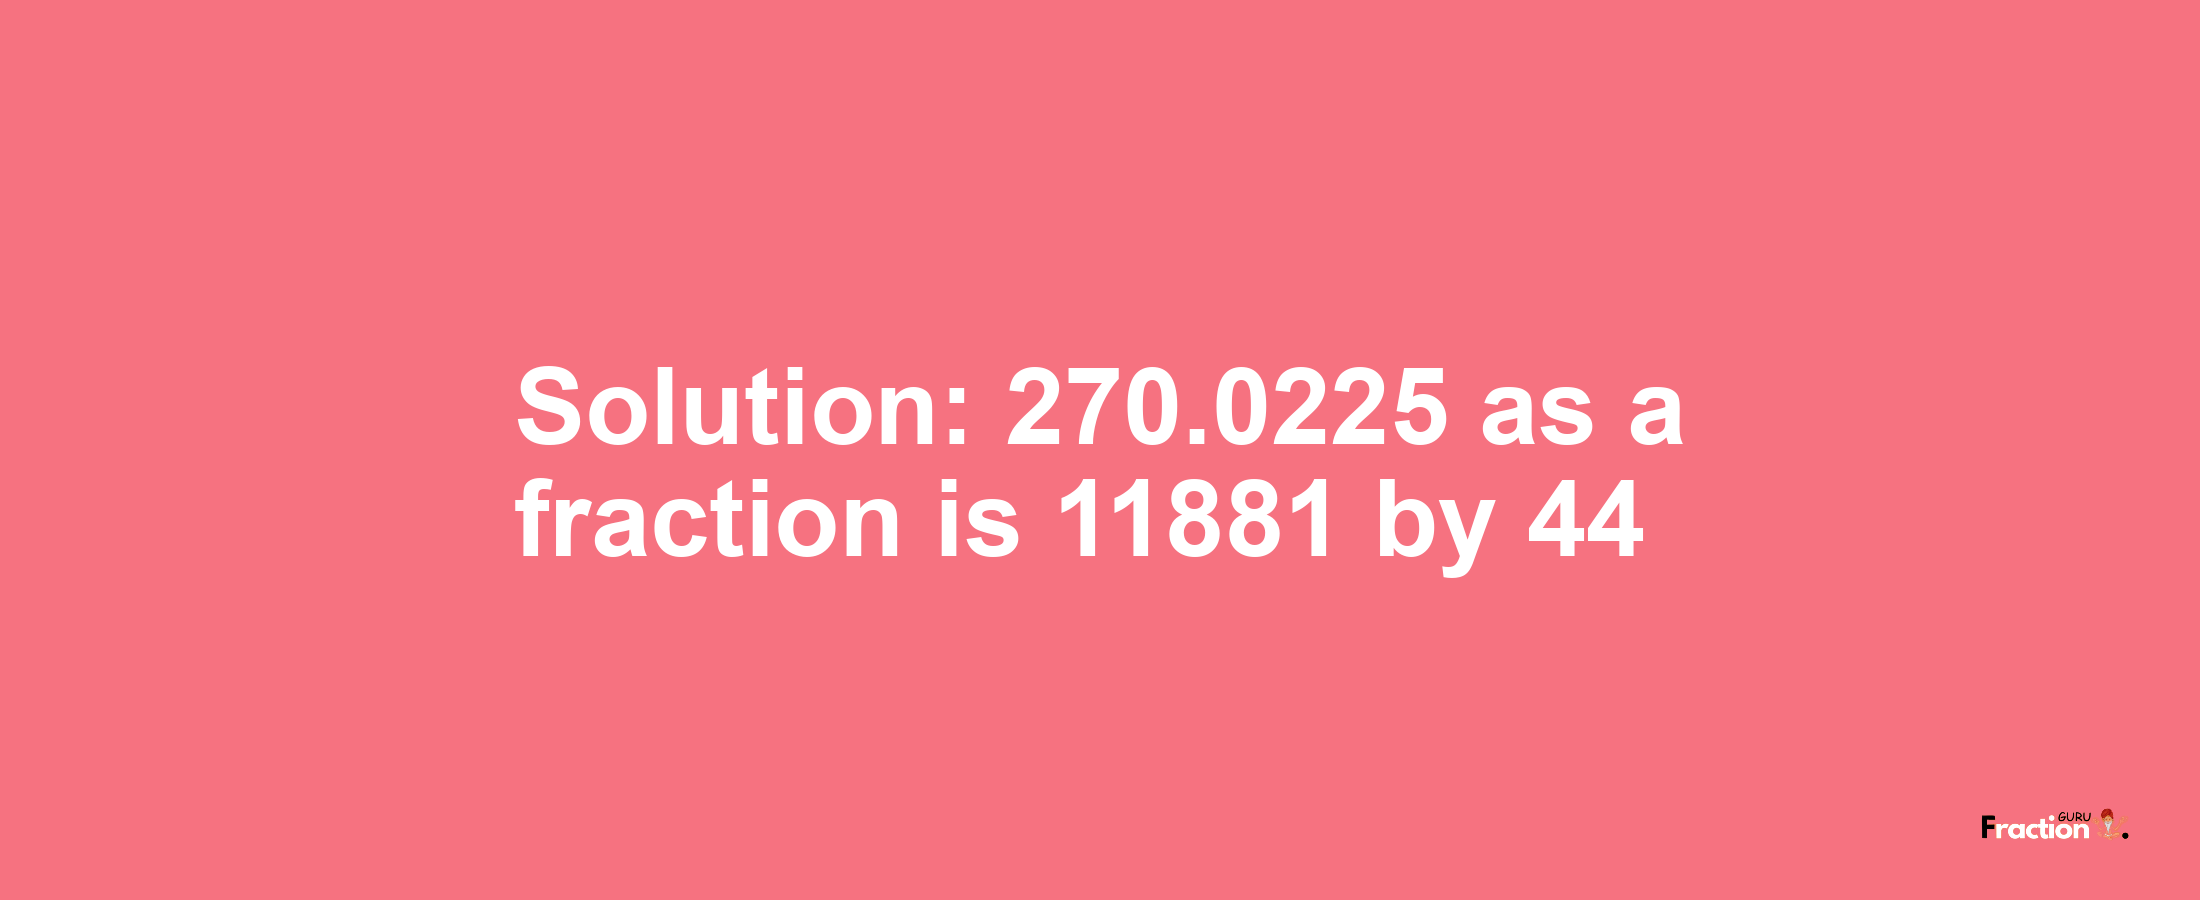 Solution:270.0225 as a fraction is 11881/44